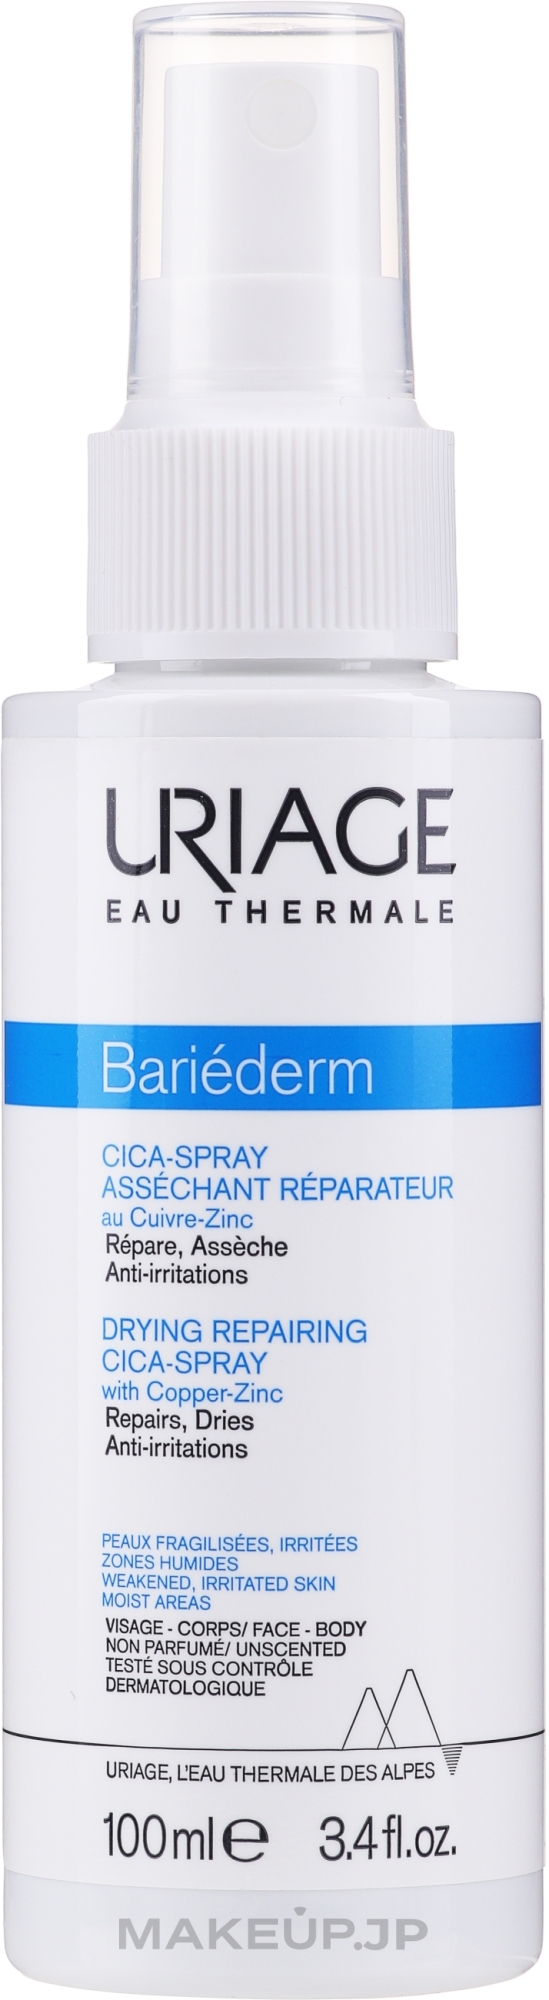 Drying Repairing Cica-Spray with Cu-Zn - Uriage Bariederm Drying Repairing Cica-Spray — photo 100 ml